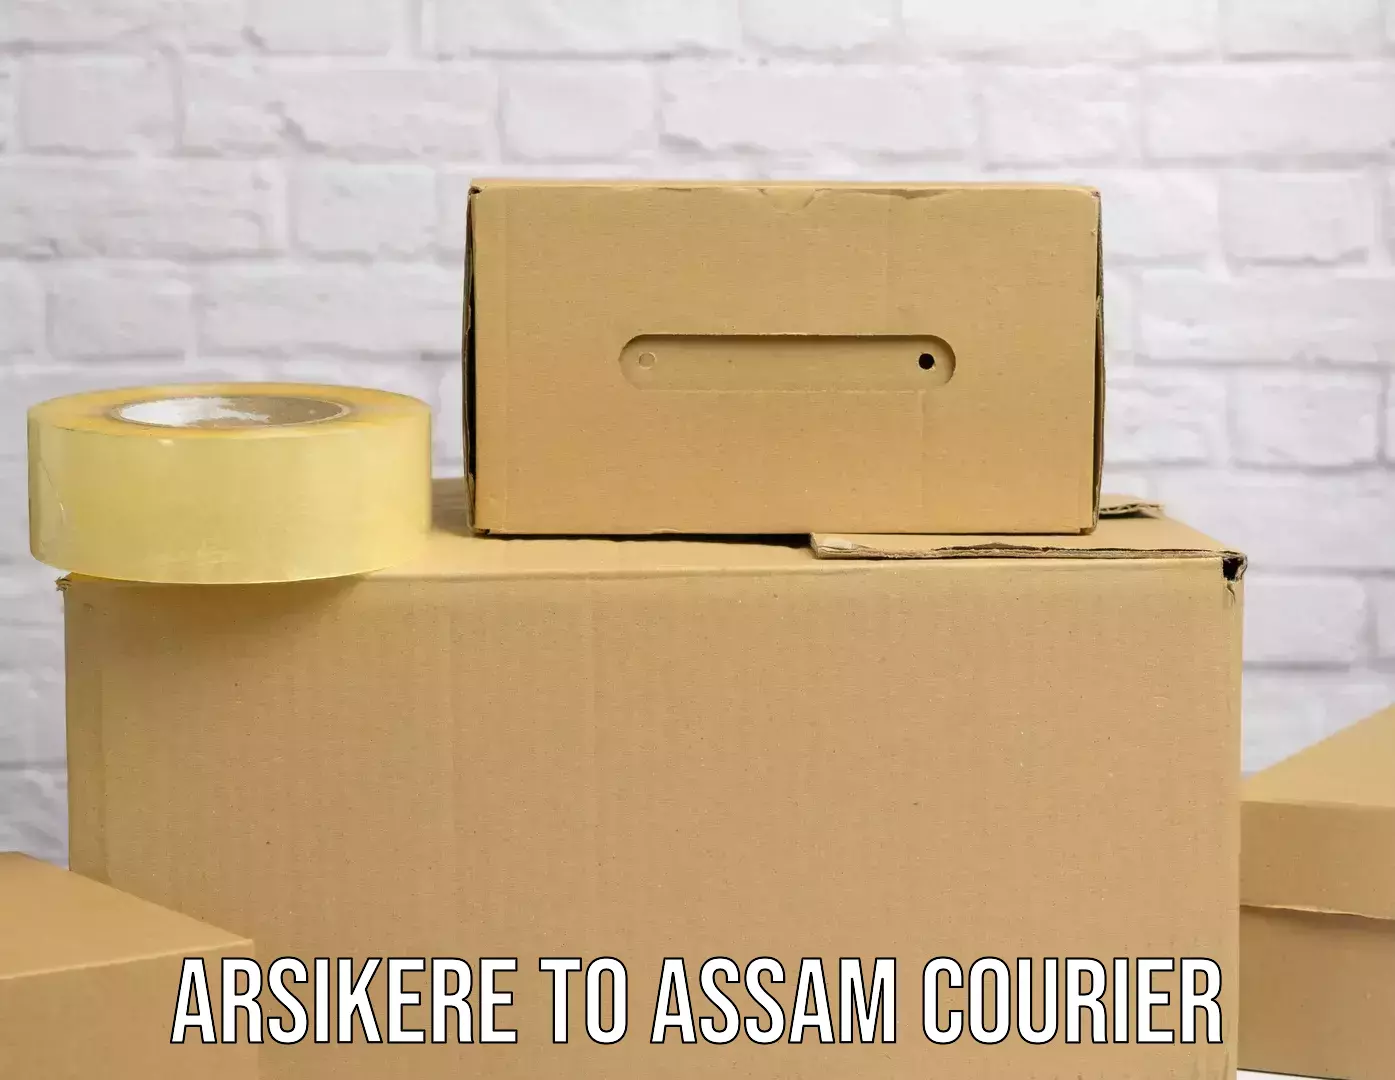 Full-service courier options Arsikere to Fekamari